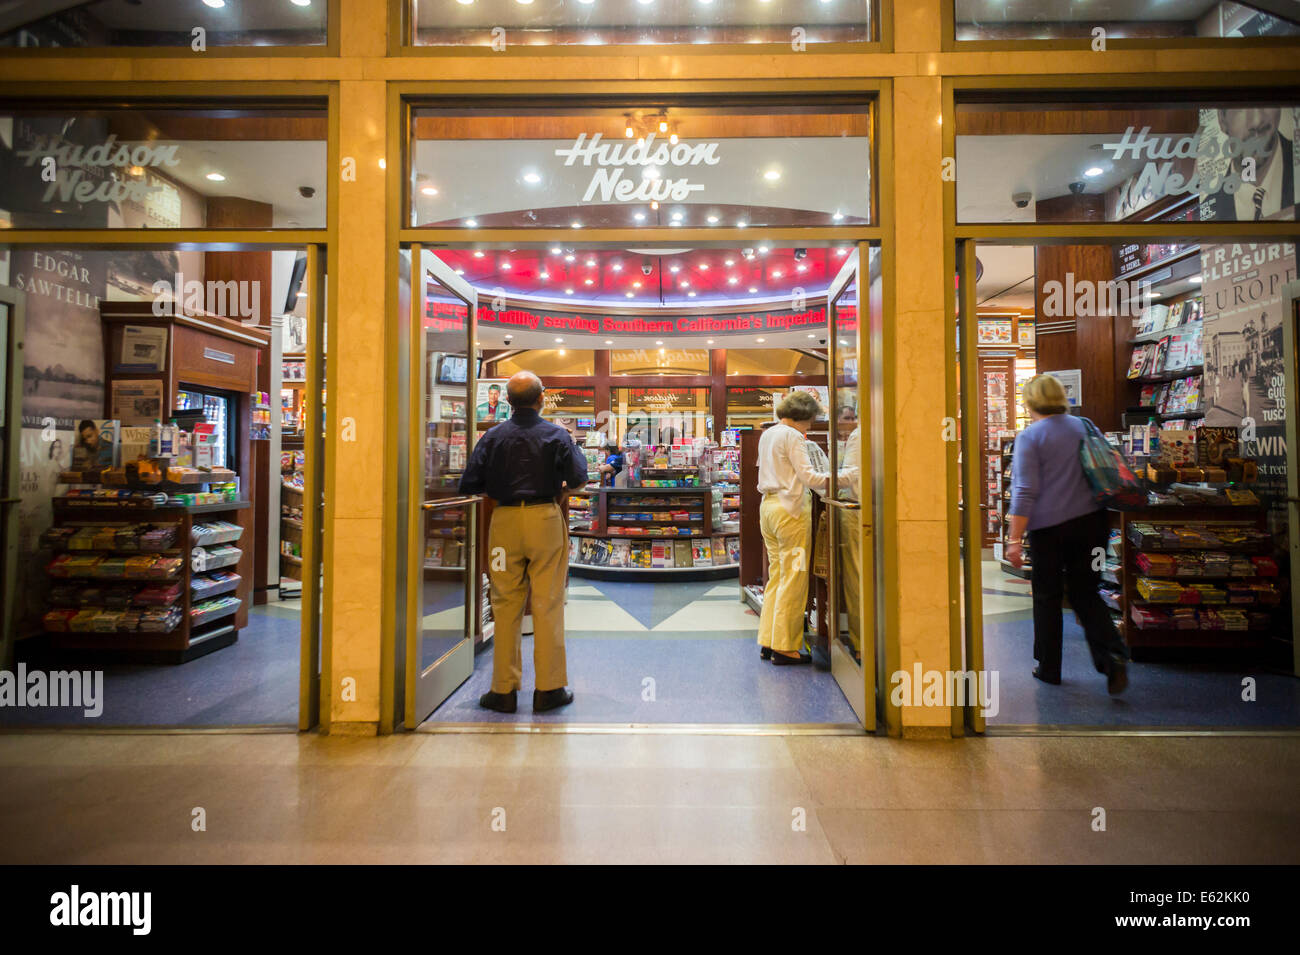 A Hudson News newsstand Grand Central Terminal in New York Stock Photo